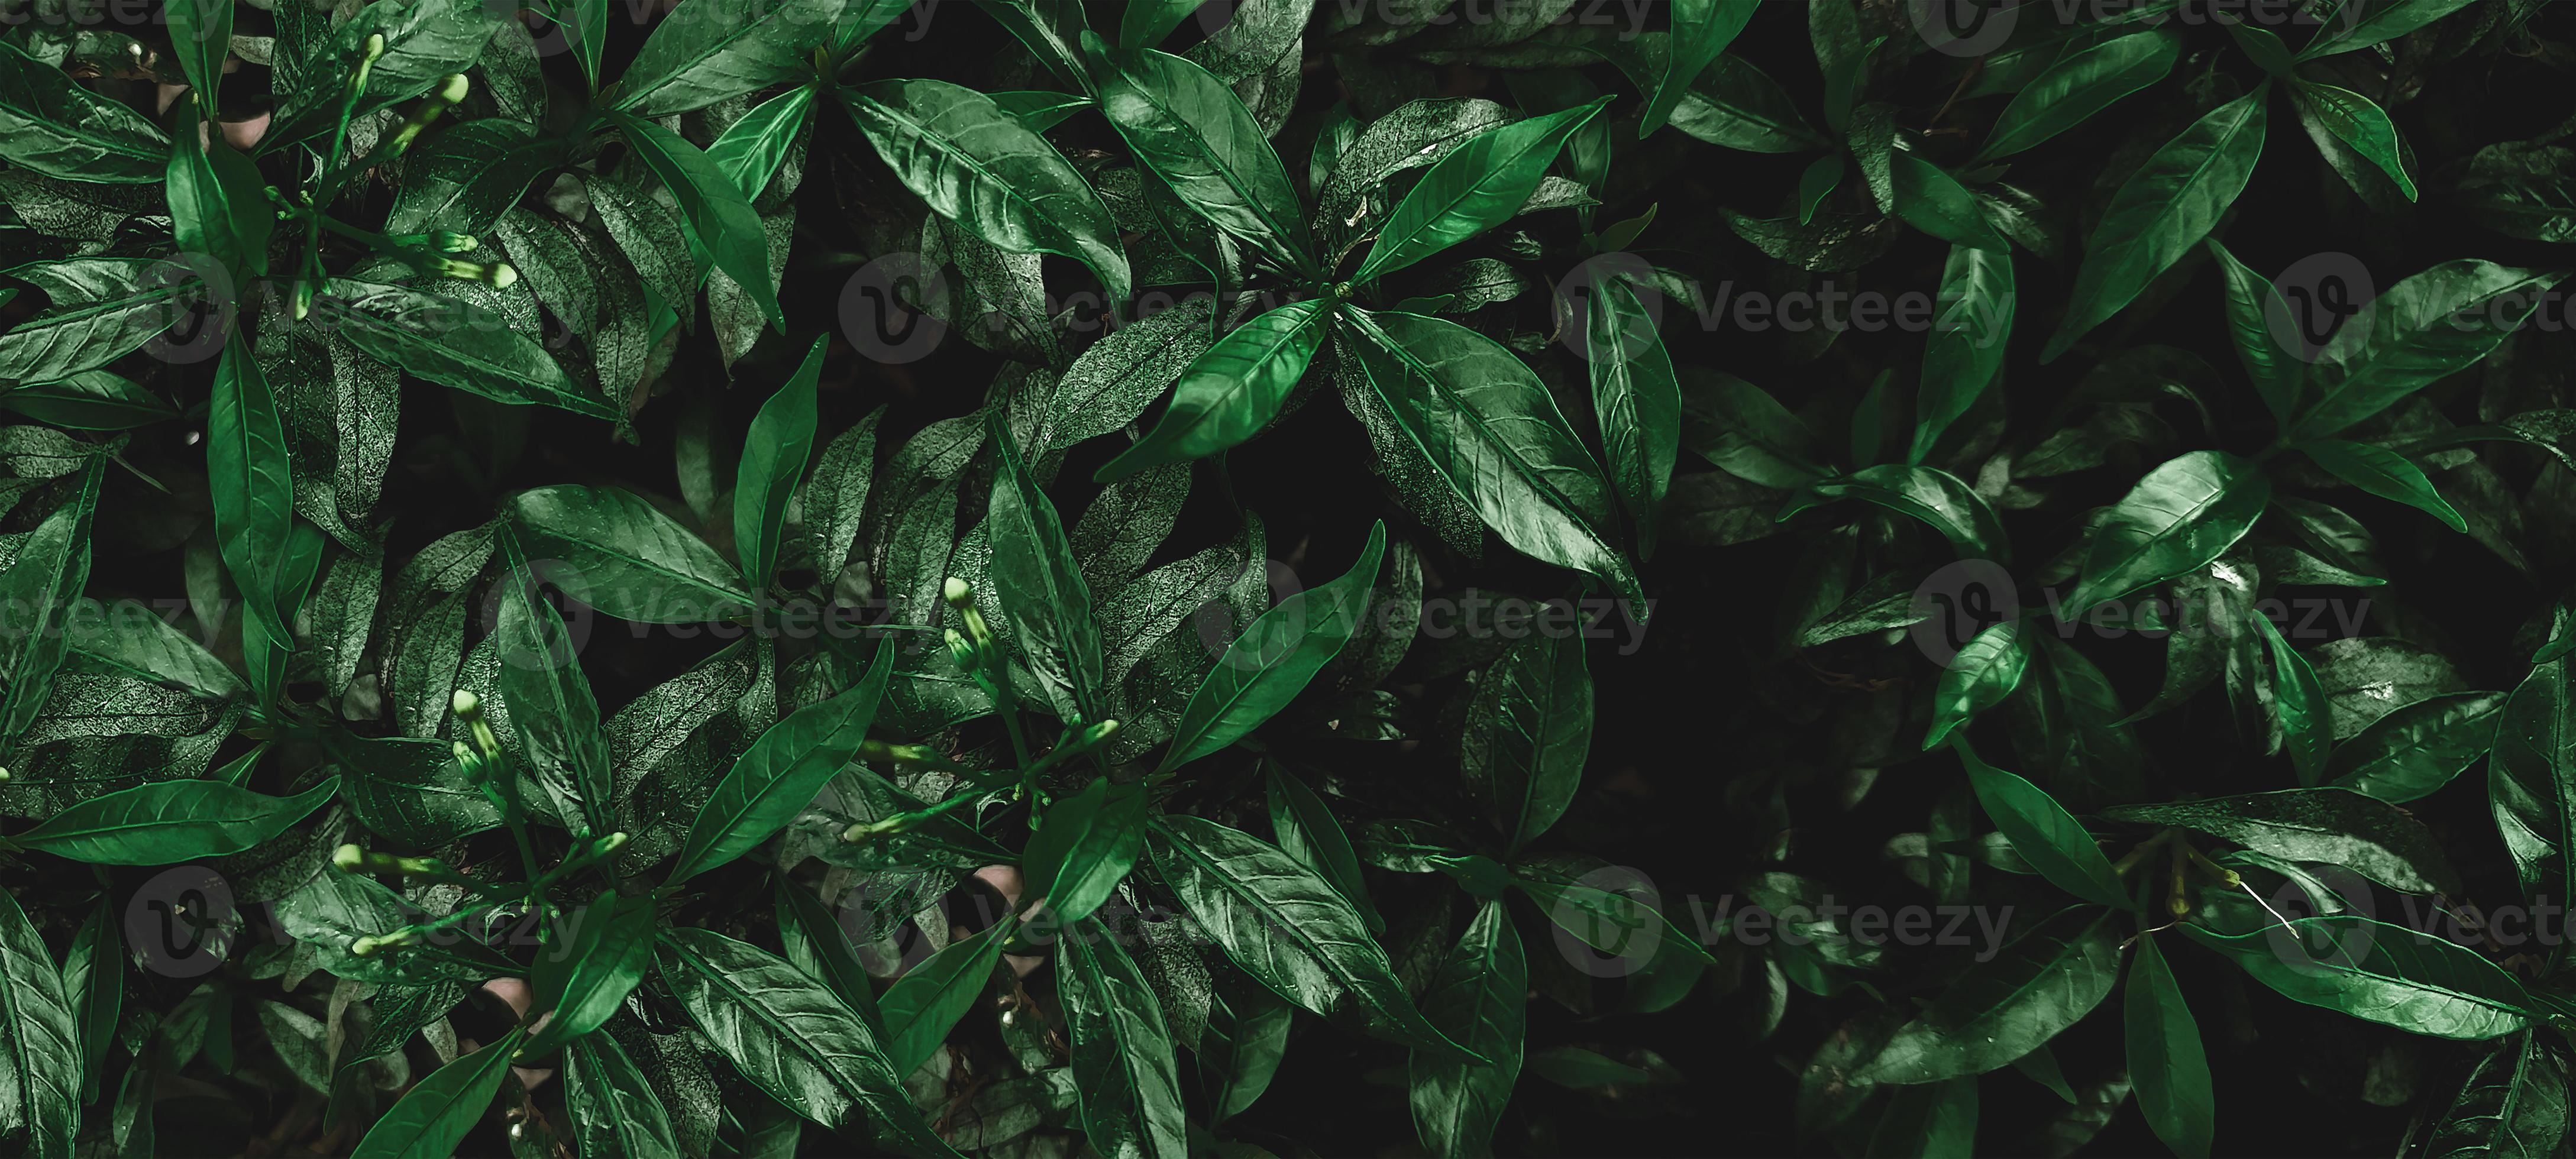 leaf dark green thon wallpaper. Nature background 10516744 Stock Photo at  Vecteezy